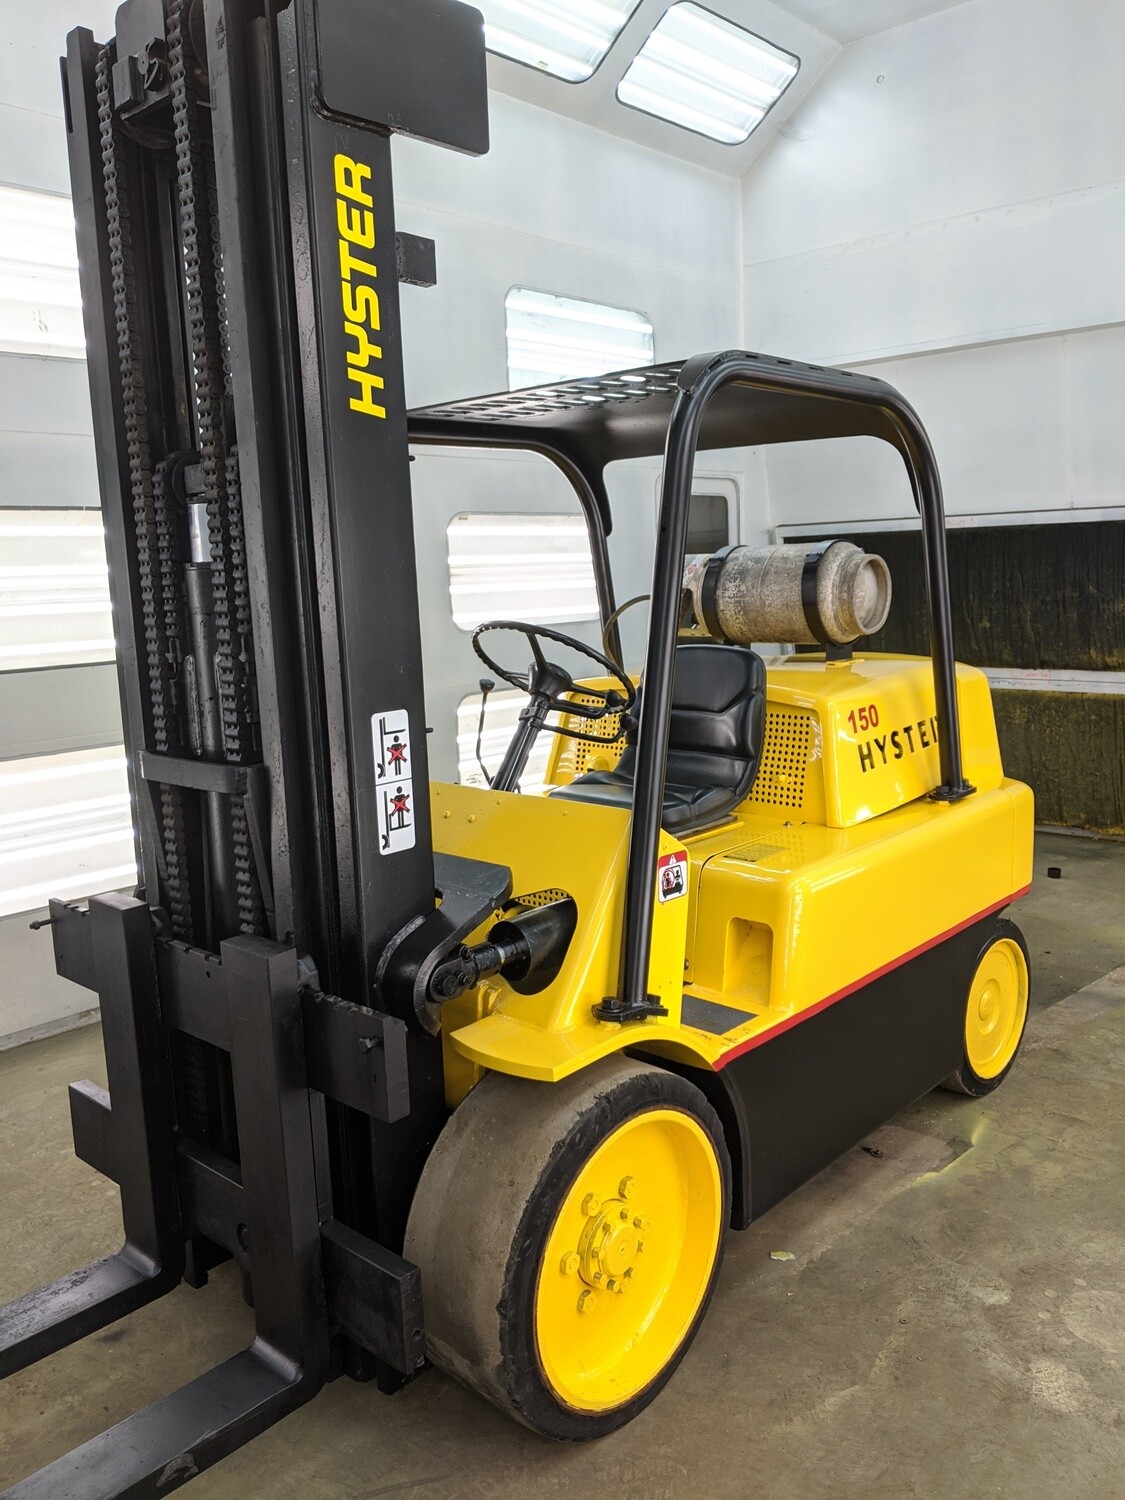 7.5 Ton Hyster S150a Forklift For Sale